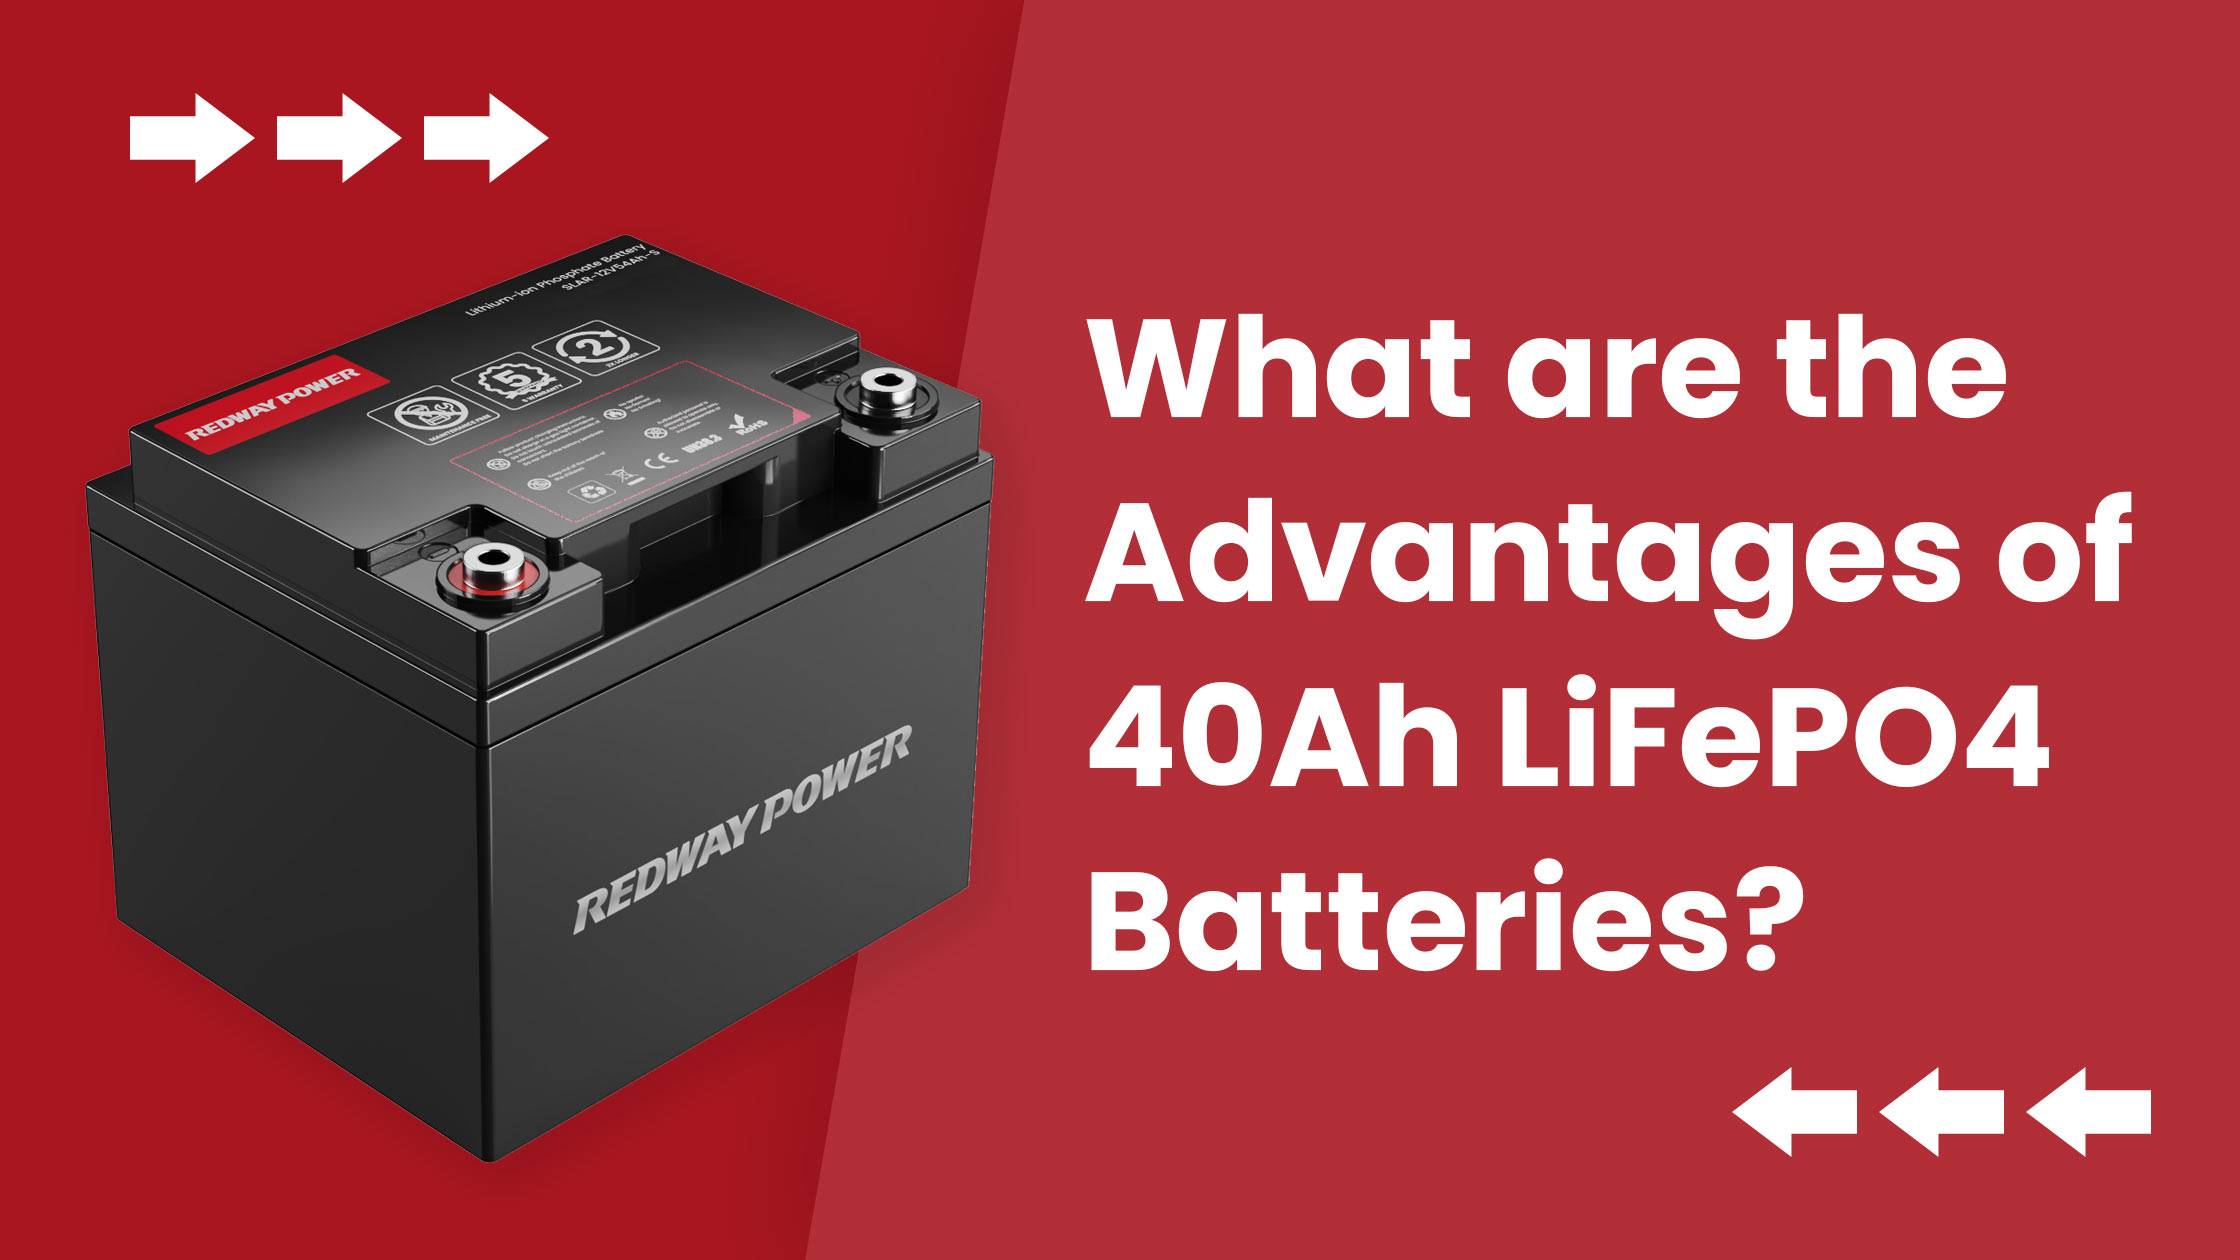 What are the advantages of 40Ah LiFePO4 batteries 12v 40ah lifepo4 manufactruer